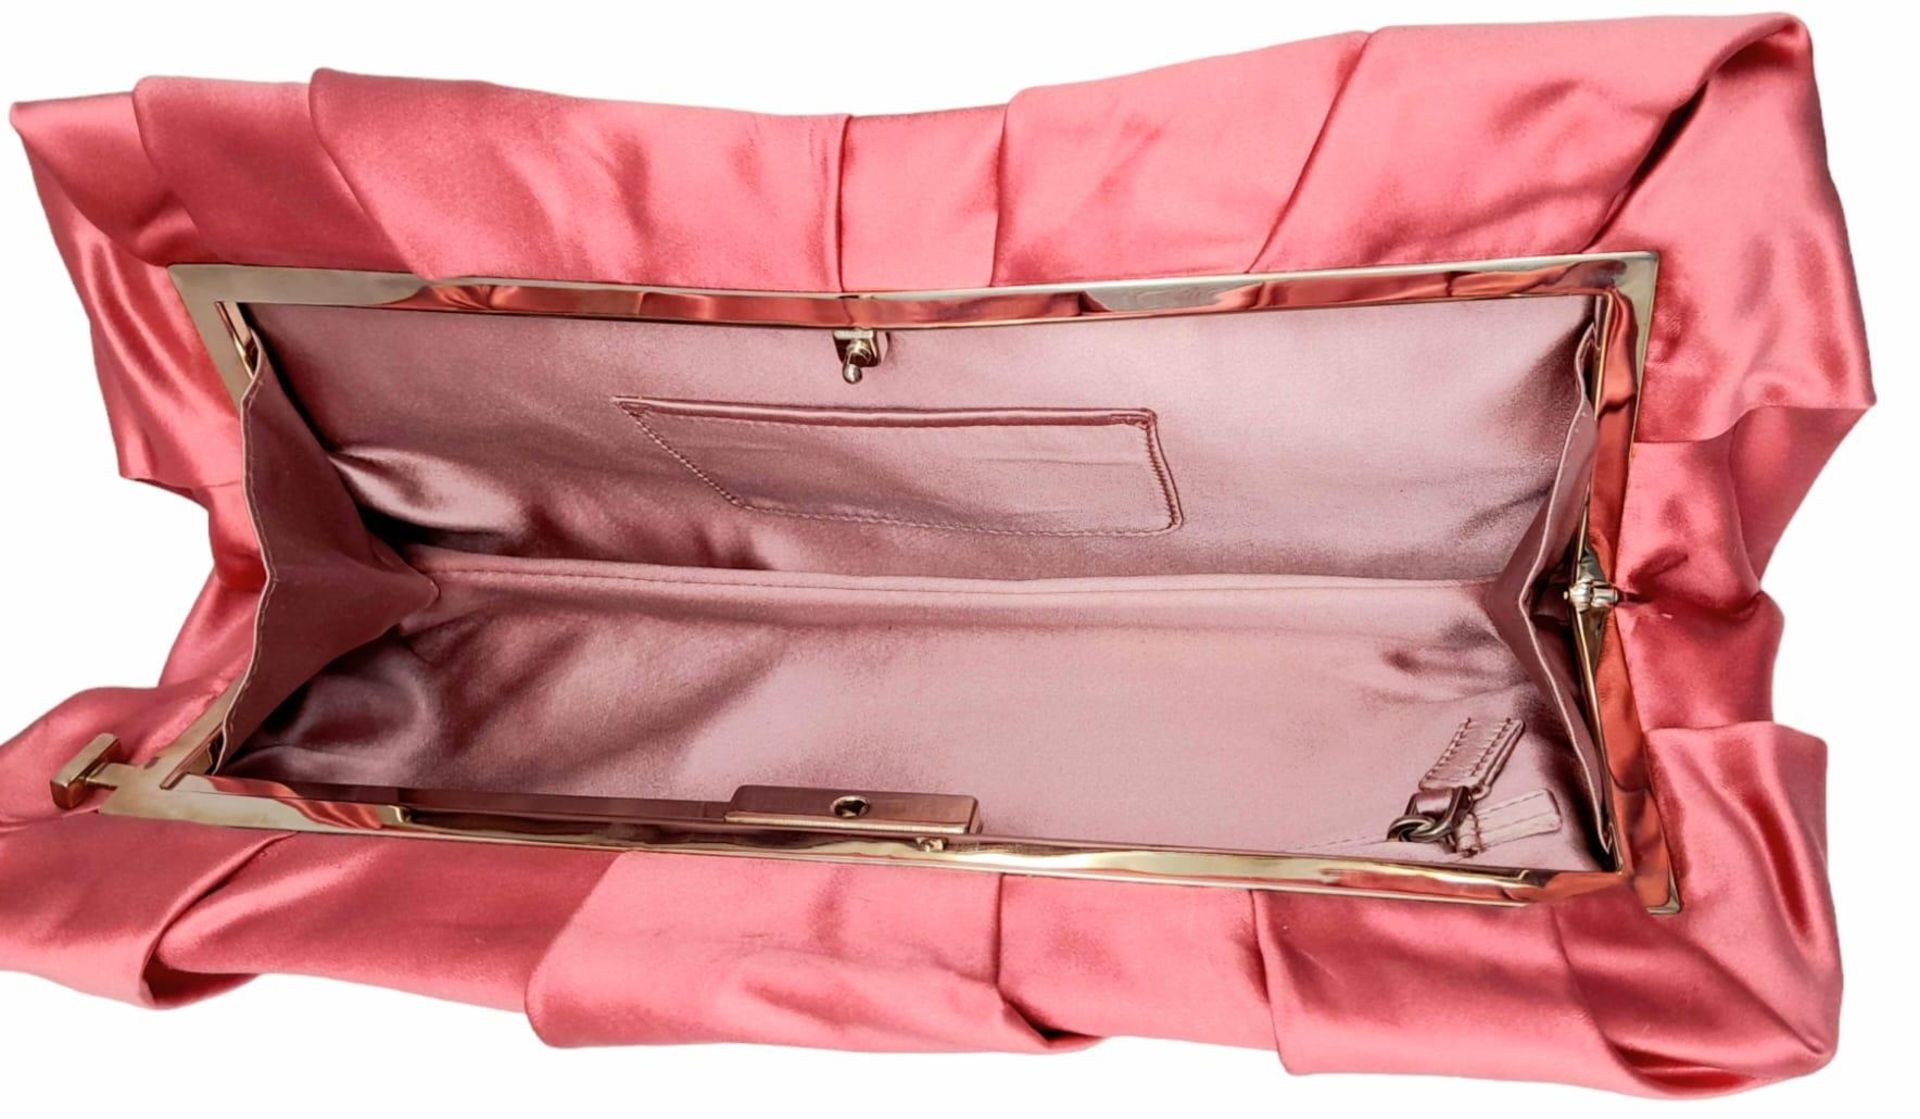 A Prada Pink Pleated Clutch Bag. Satin exterior with silver-toned hardware and press lock closure to - Image 6 of 9